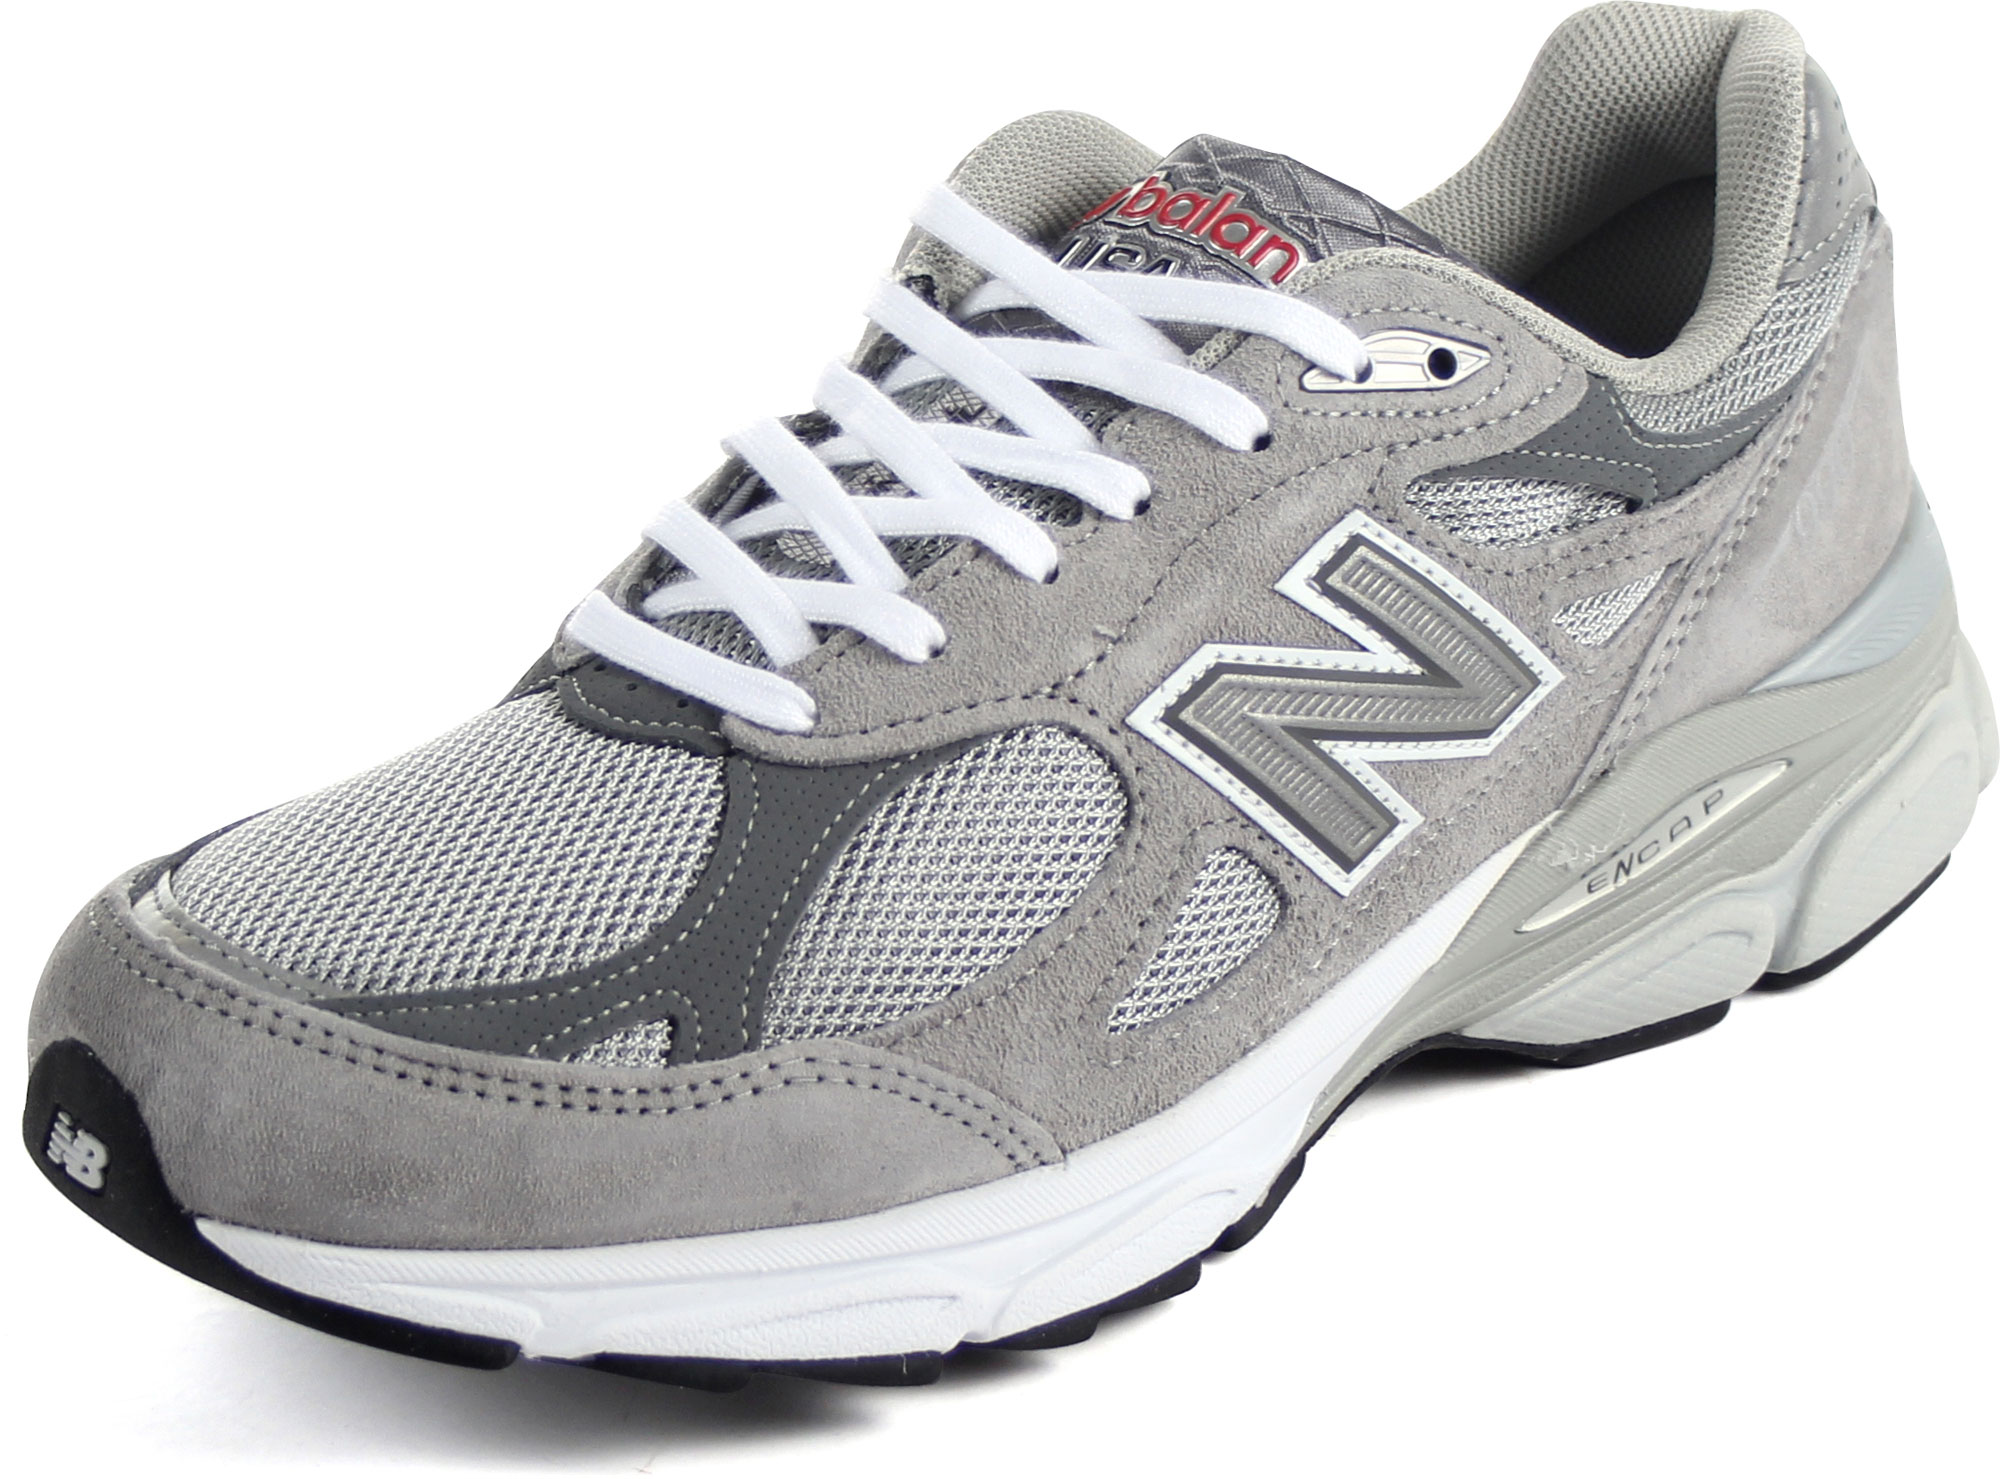 New Balance - Mens 990v3 Stability Running Shoes